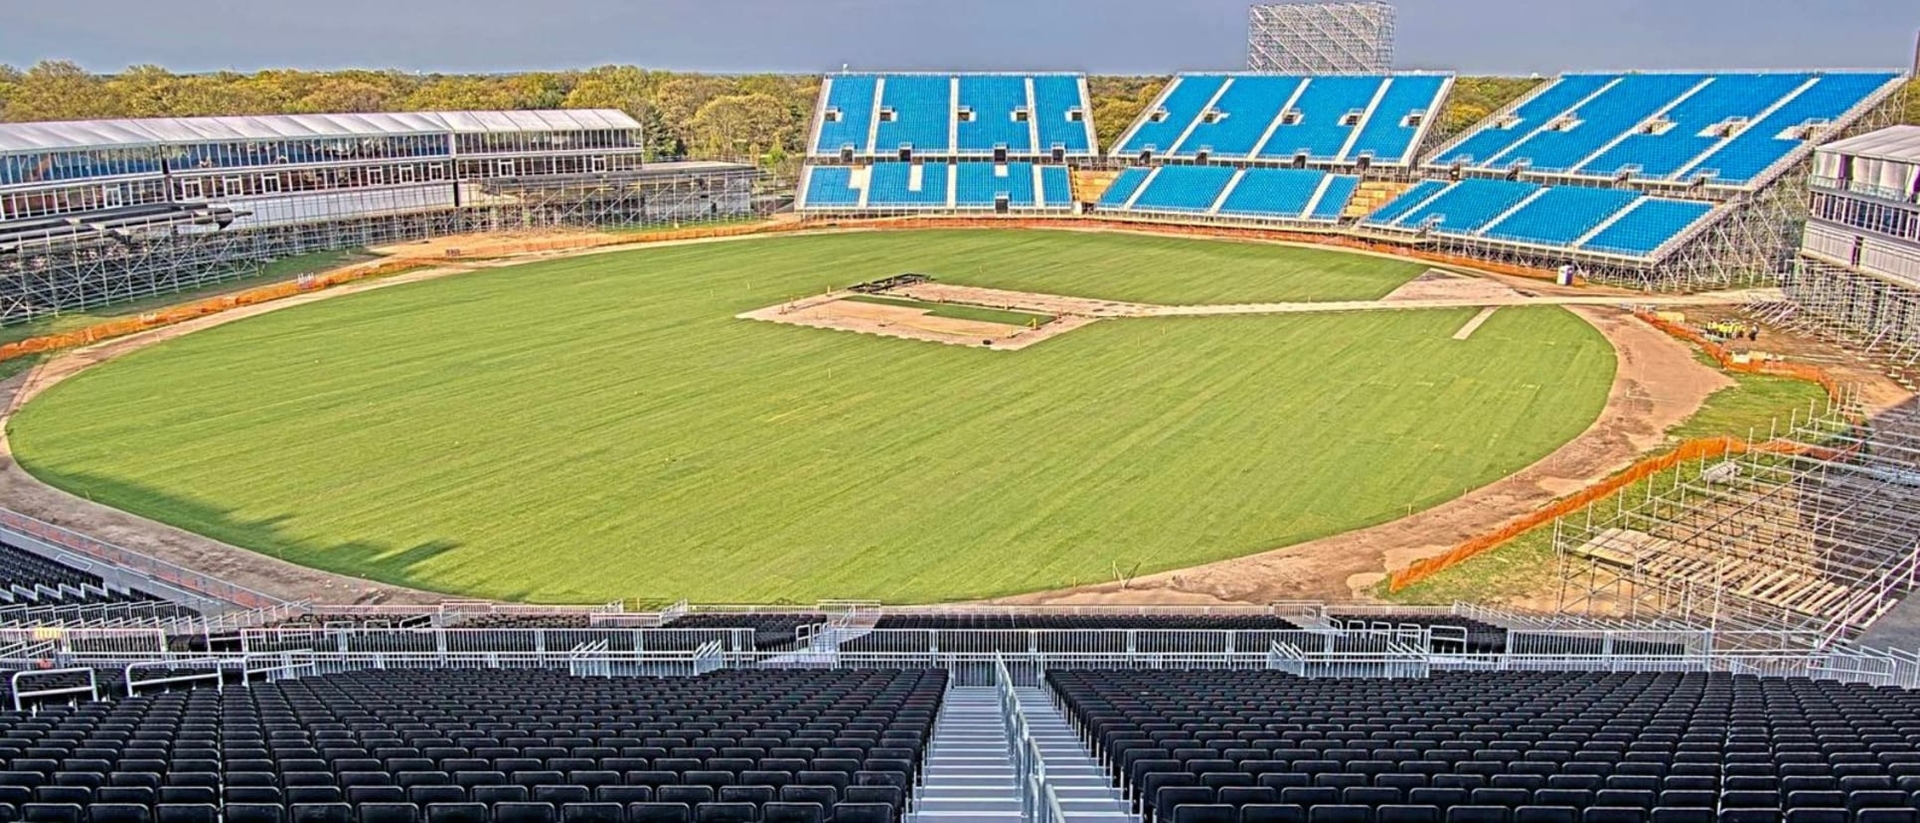 Tigers set for New York: T20 World Cup pitches arrive at Nassau County Stadium